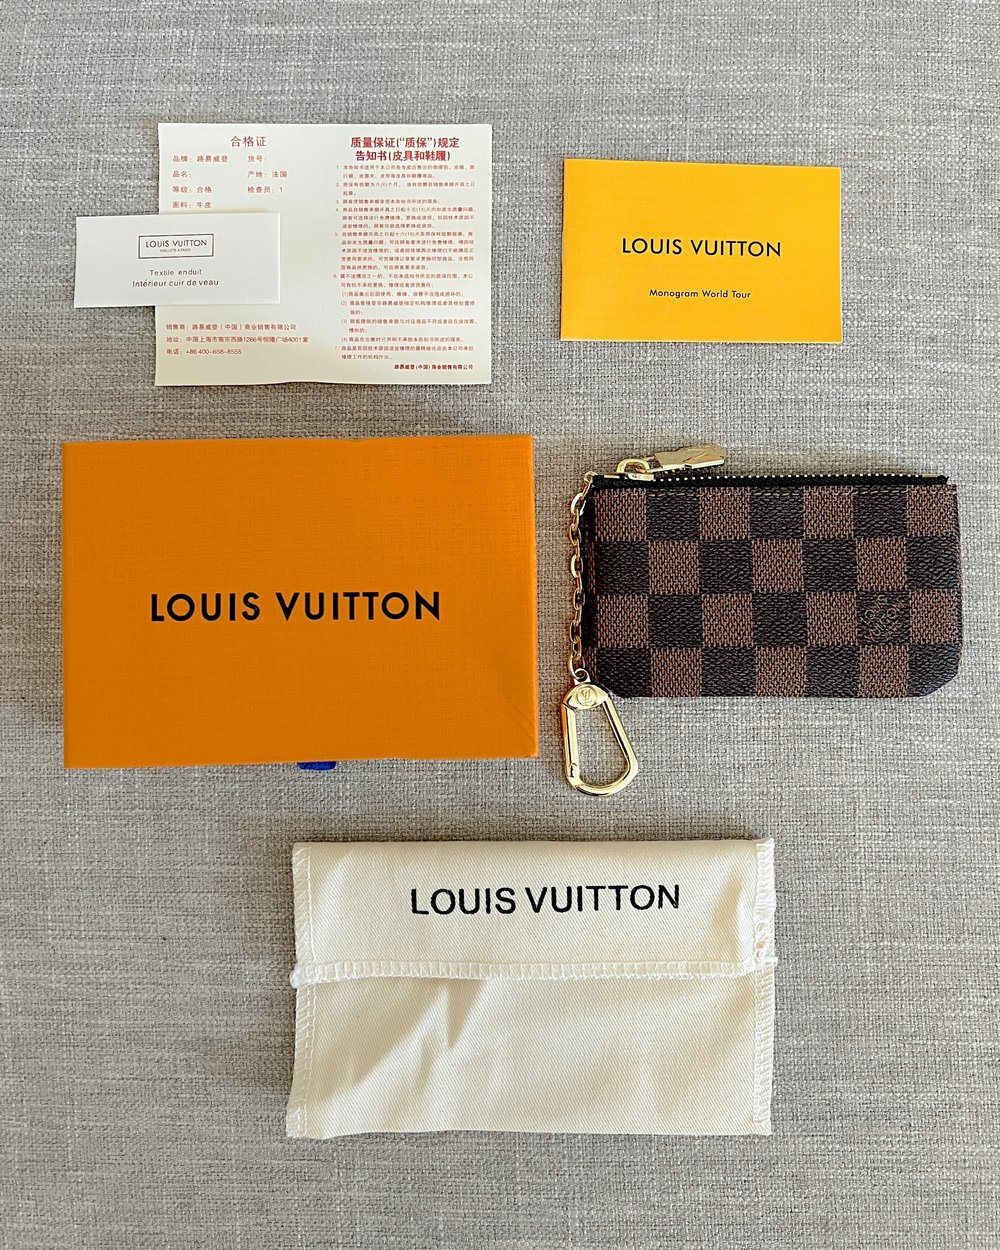 DHgate LV Key Pouch with Links! 